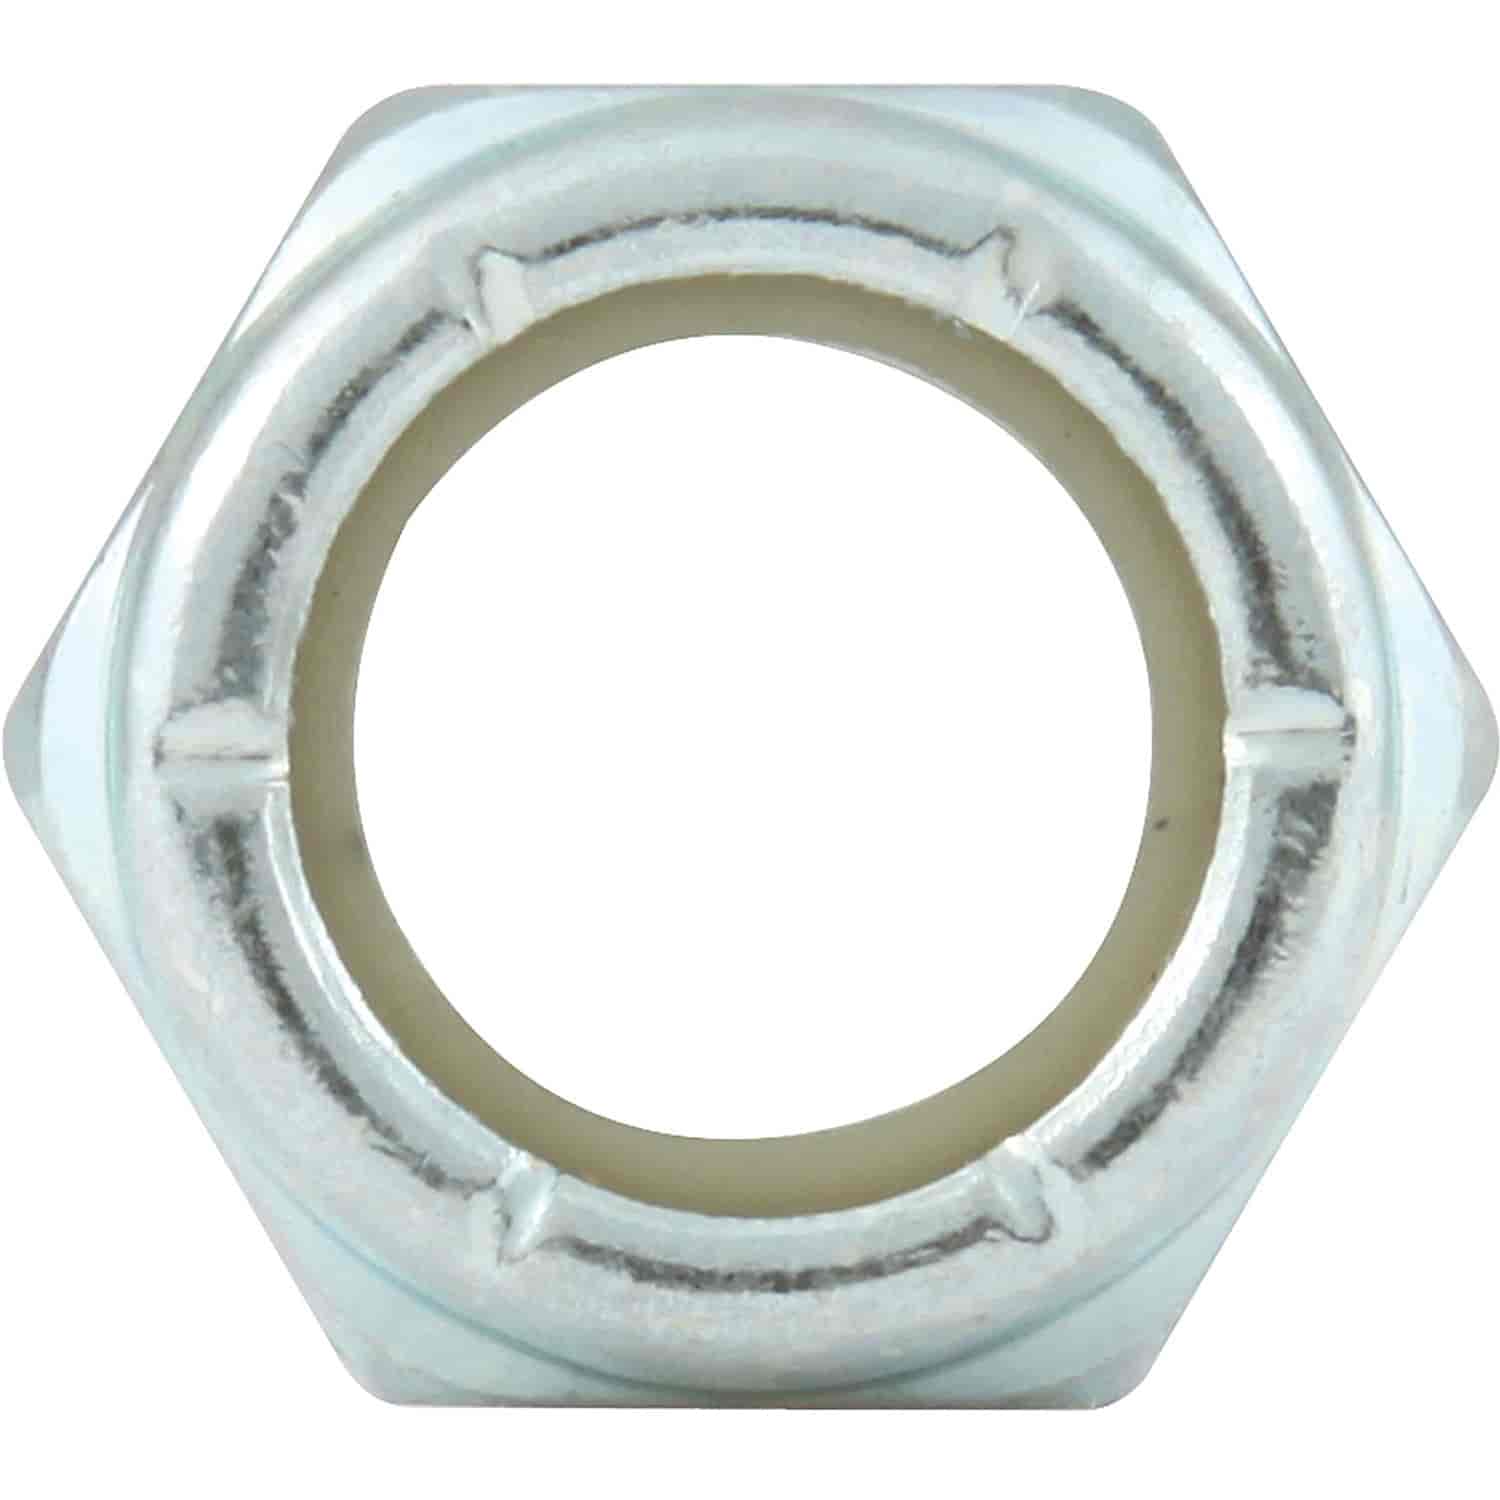 Fine Thread Hex Nuts Thin With Nylon Inserts 1/2"-20